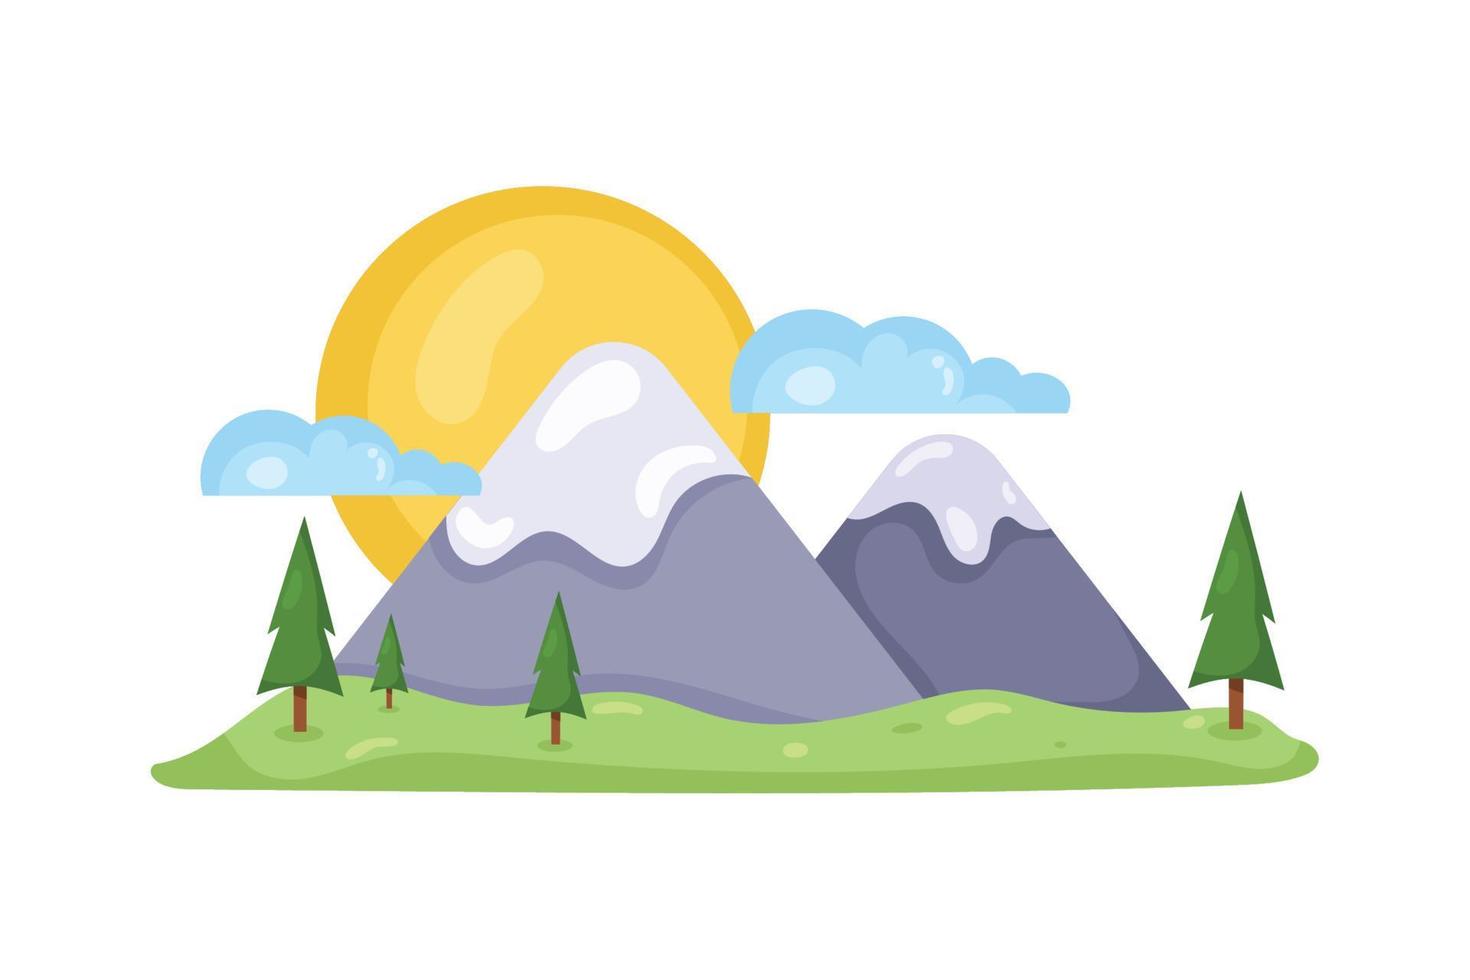 rocky mountains canadian landscape vector